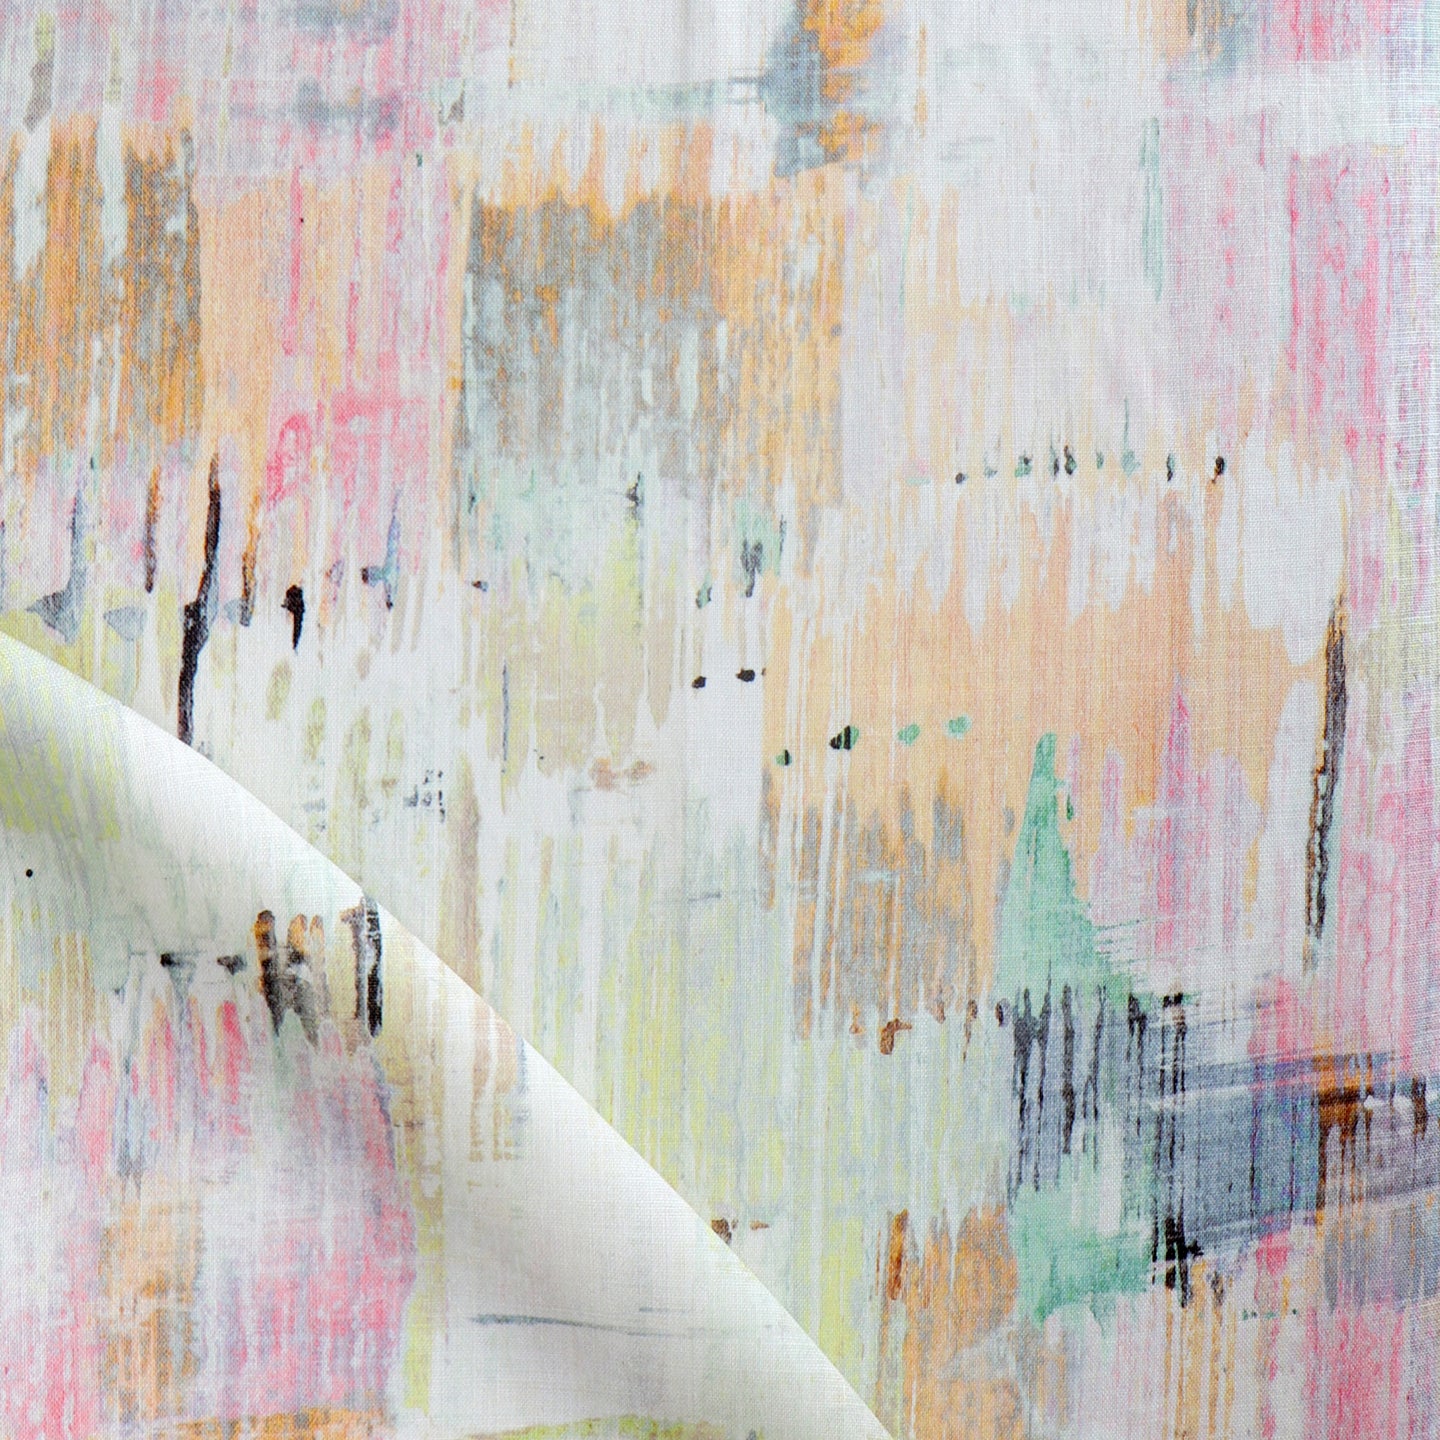 A close up of an abstract painting on fabric